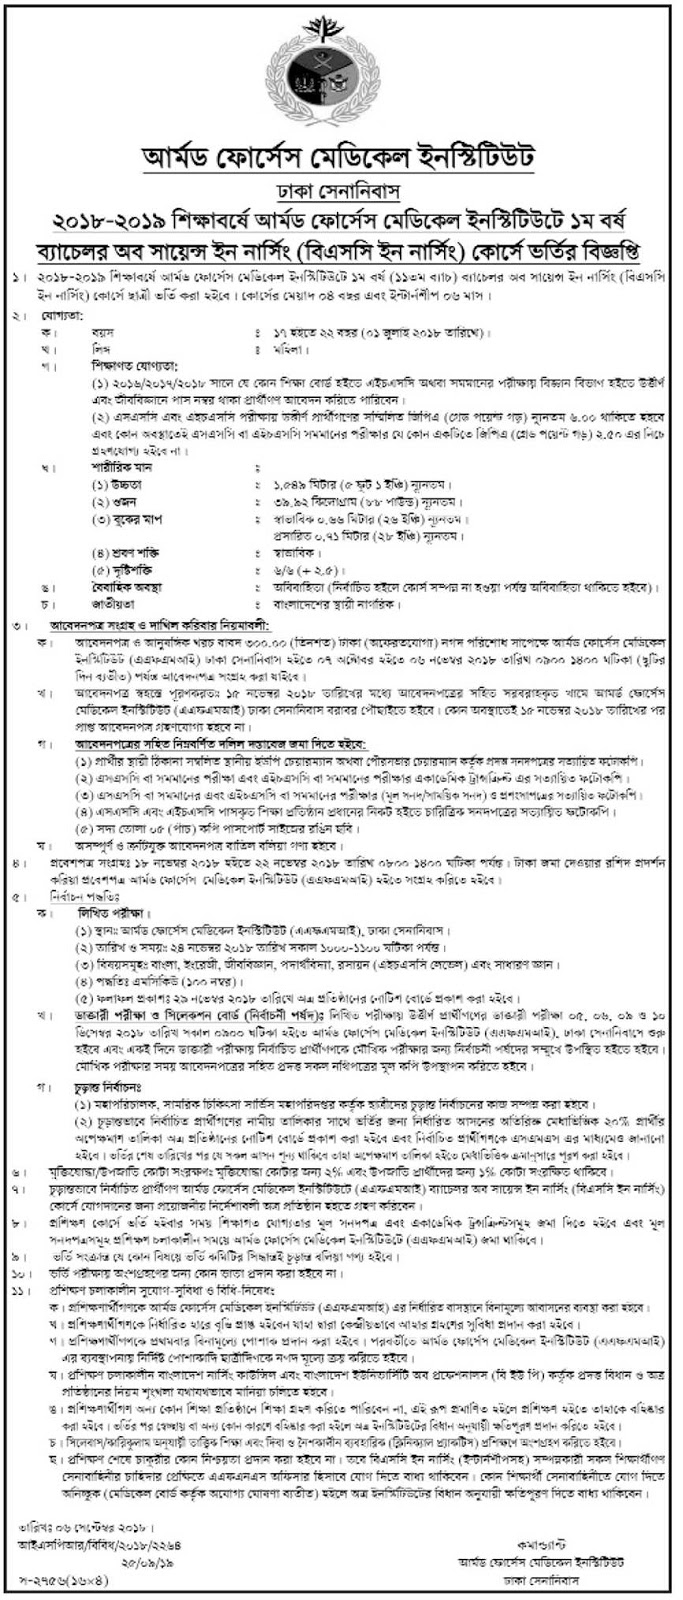 Armed Forces Medical Institute (AFMI) , Dhaka Cantonment B.Sc in Nursing Admission Circular 2018-2019